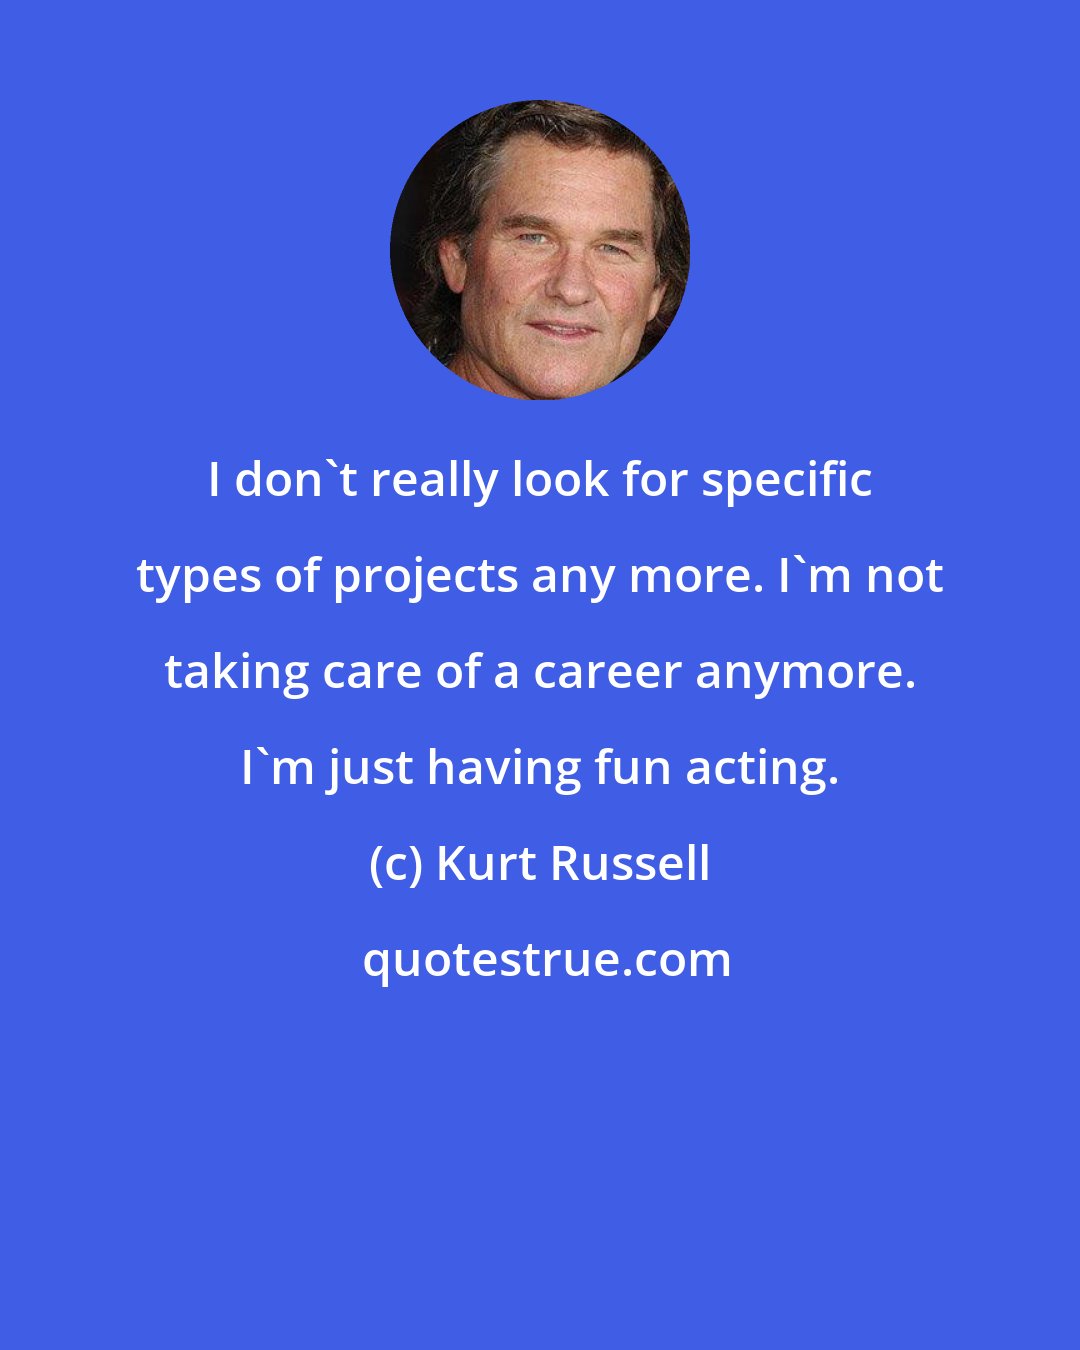 Kurt Russell: I don't really look for specific types of projects any more. I'm not taking care of a career anymore. I'm just having fun acting.